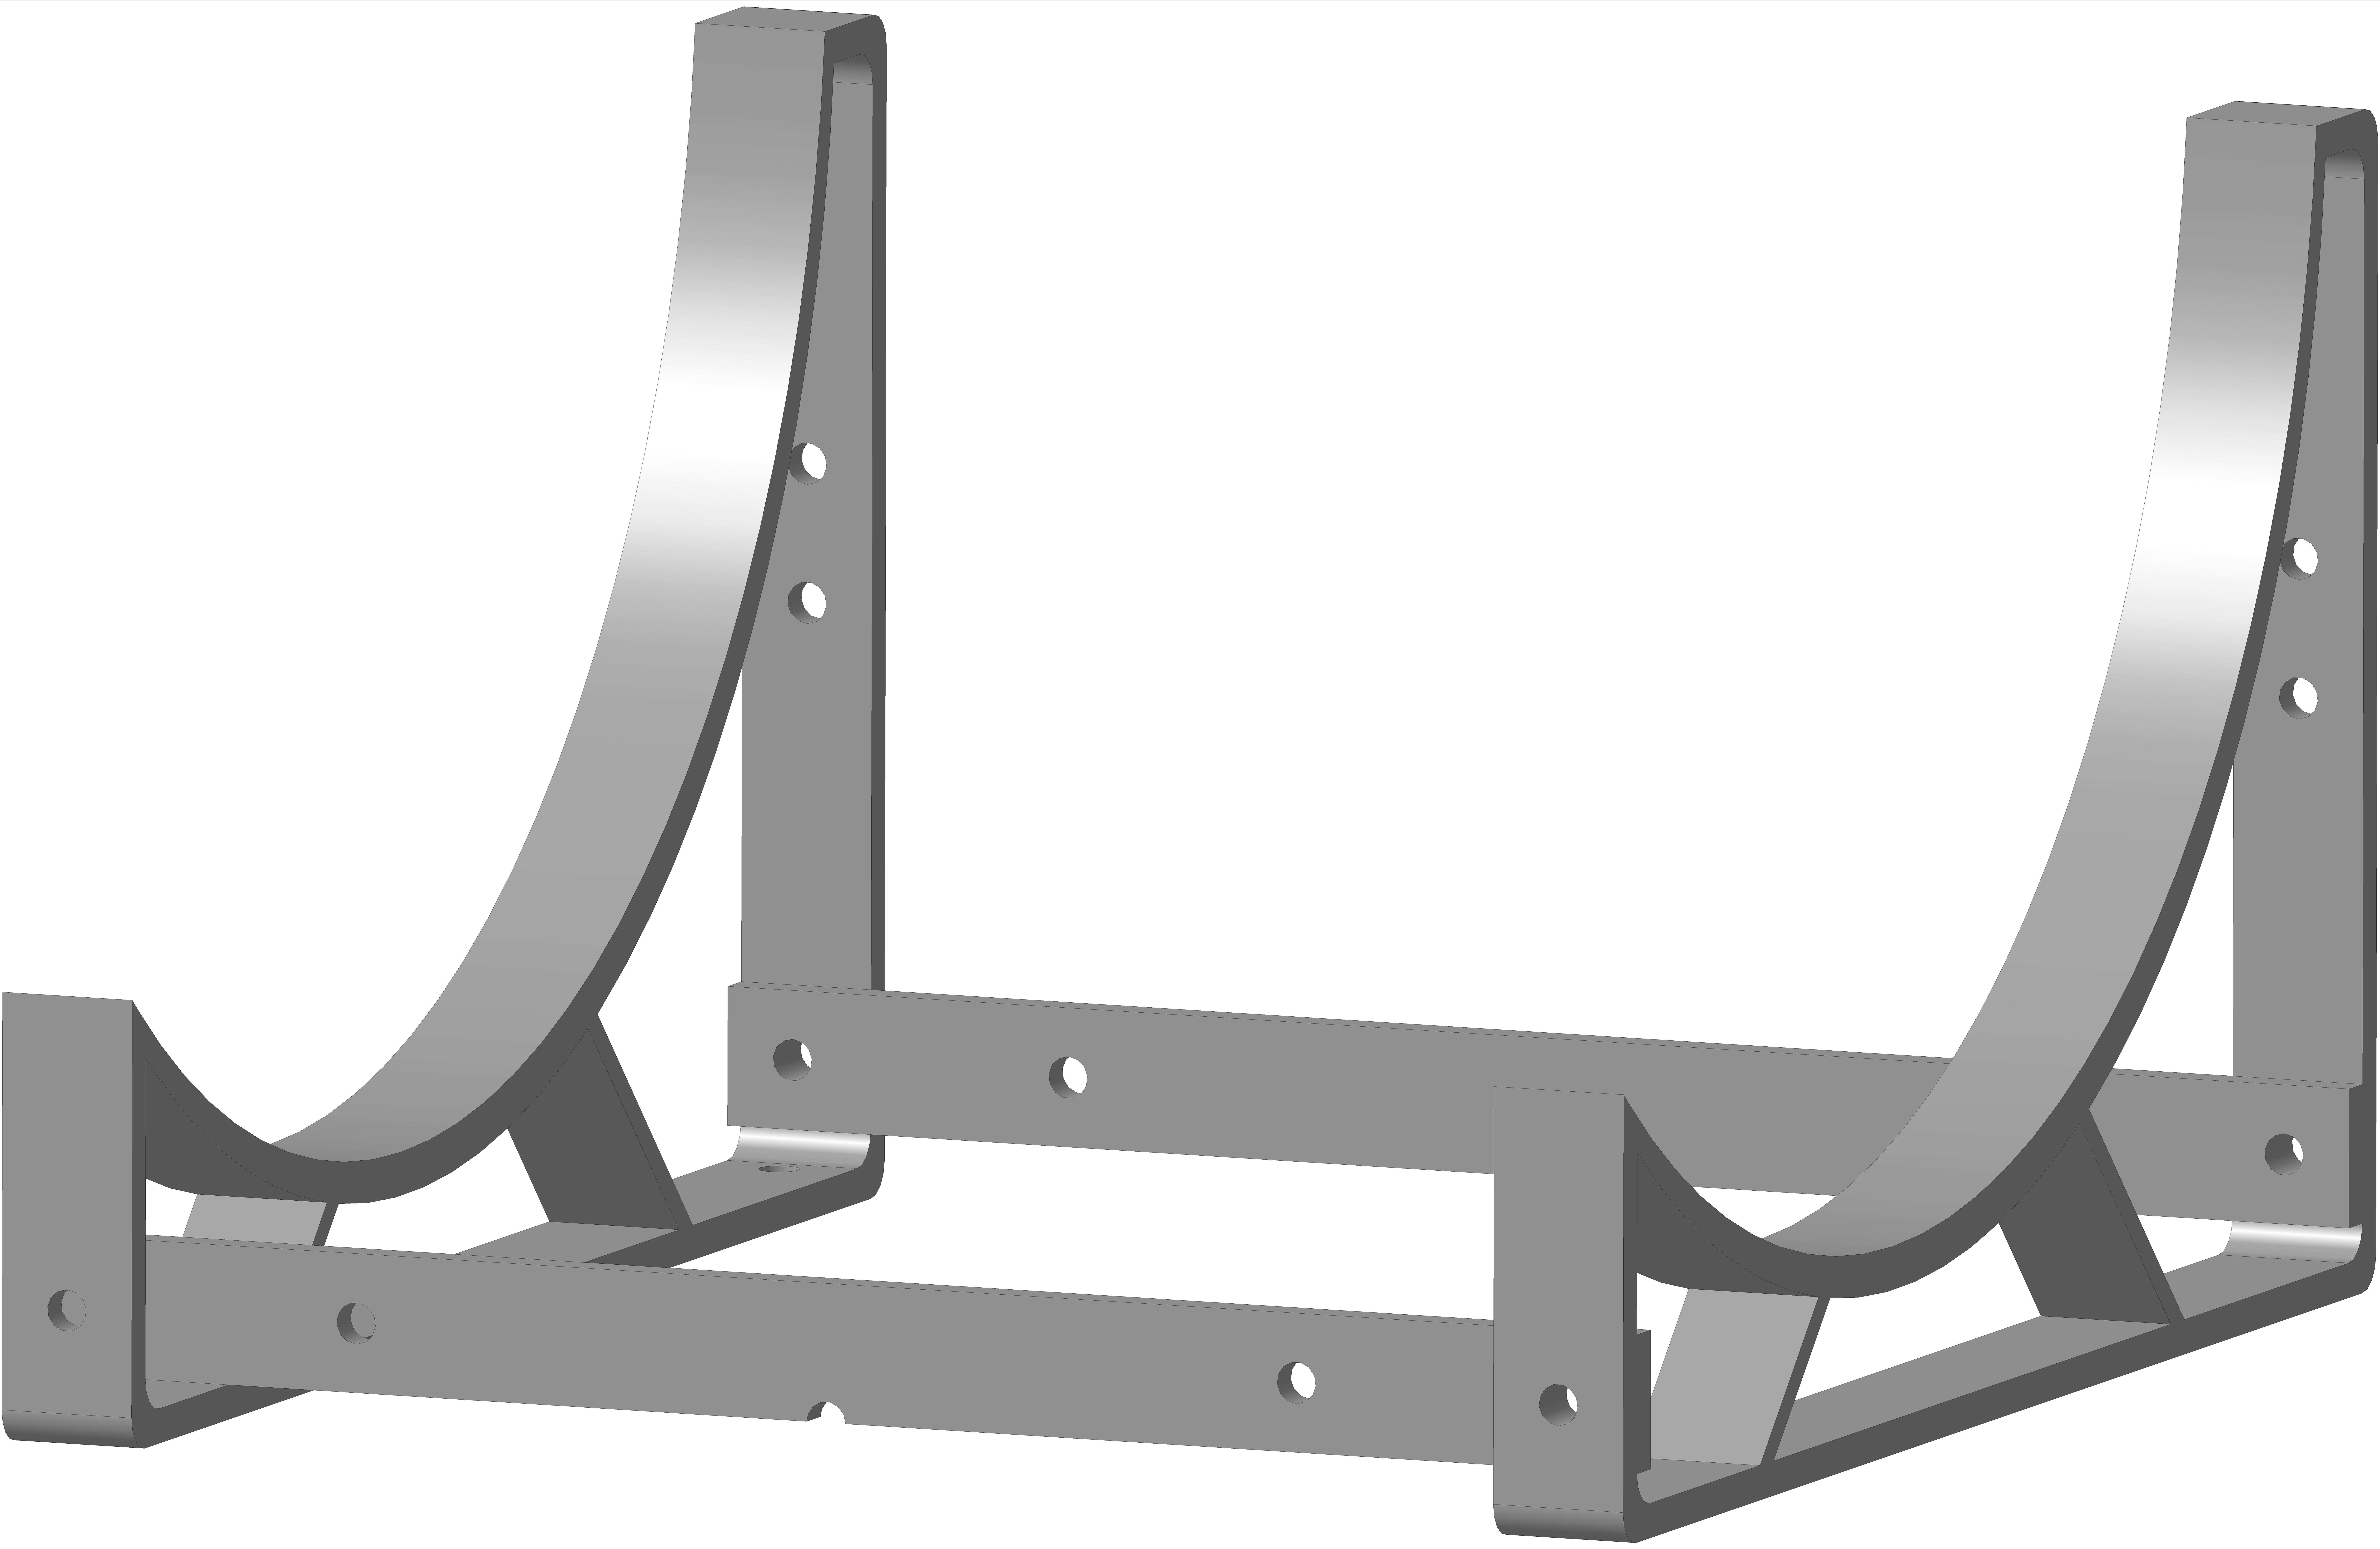 Galvanized deck cradle for 6-8DK drawing